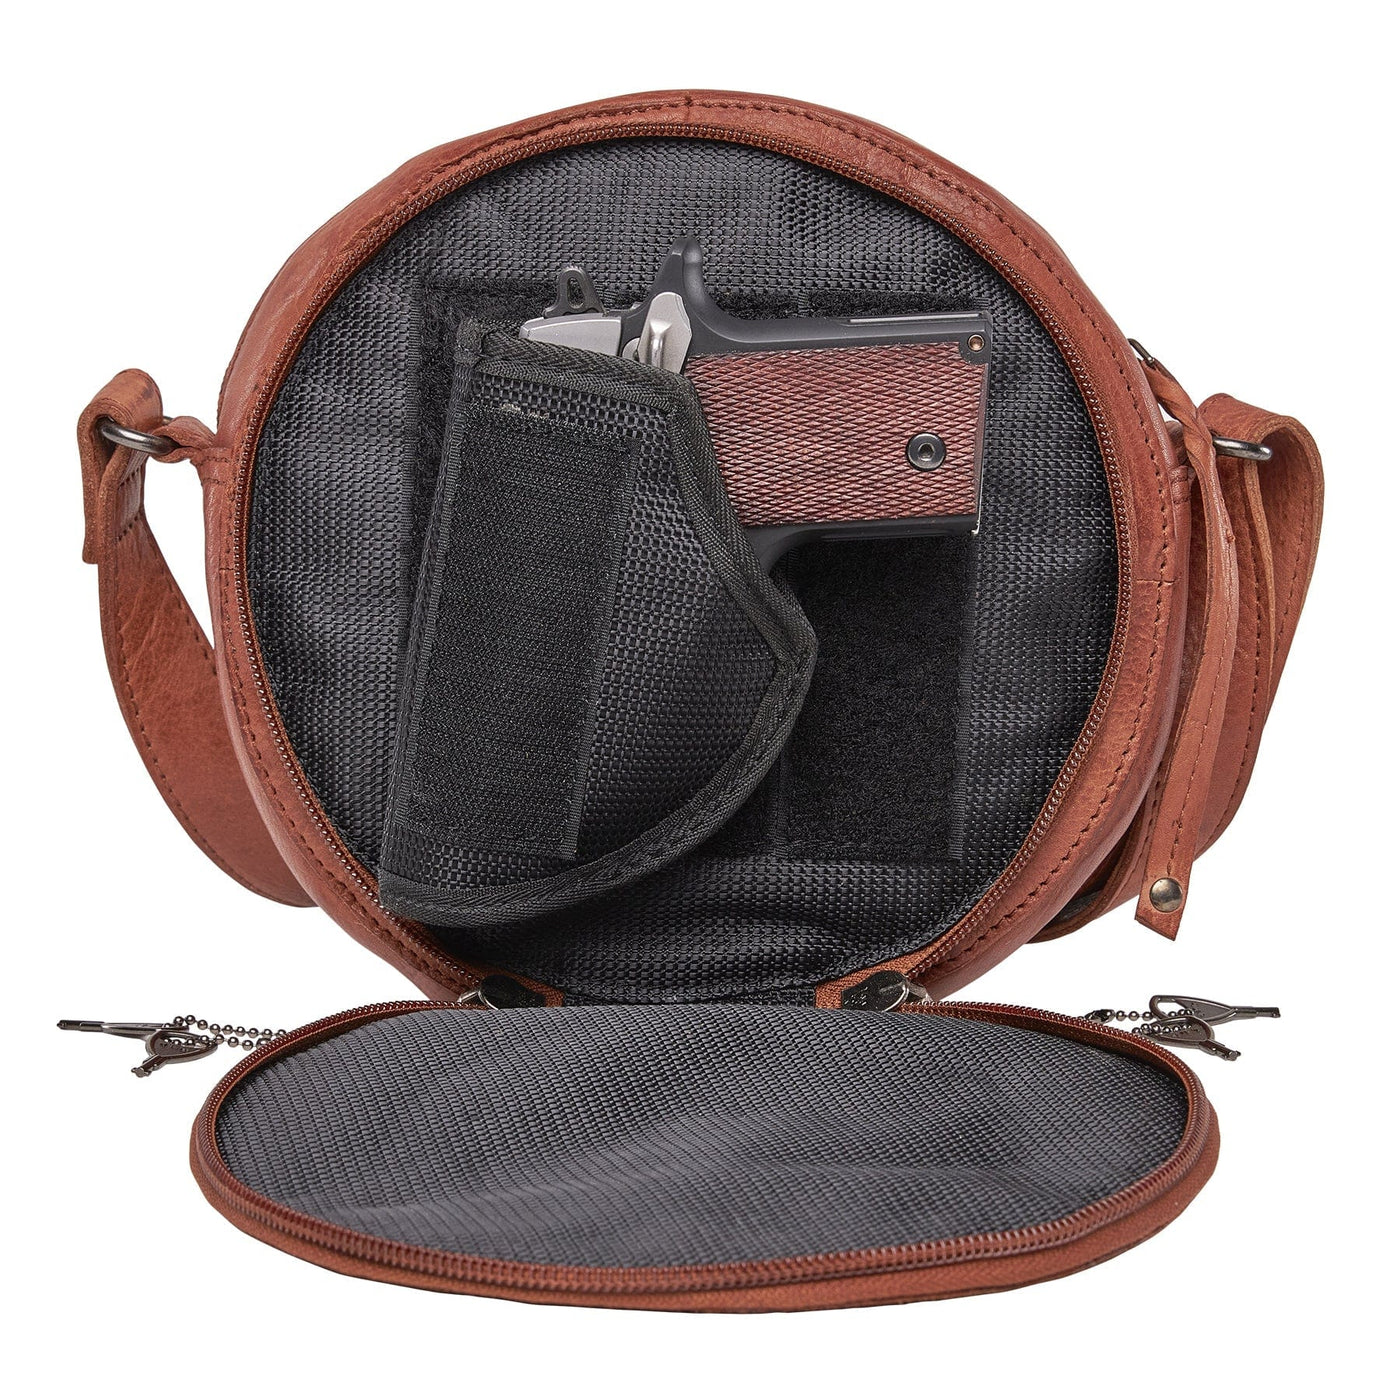 Concealed Carry Mia Crossbody Purse with Locking Zippers and Universal Holster Tactical Bag for Women  - YKK Locking Gun Purse With Concealment Pocket 